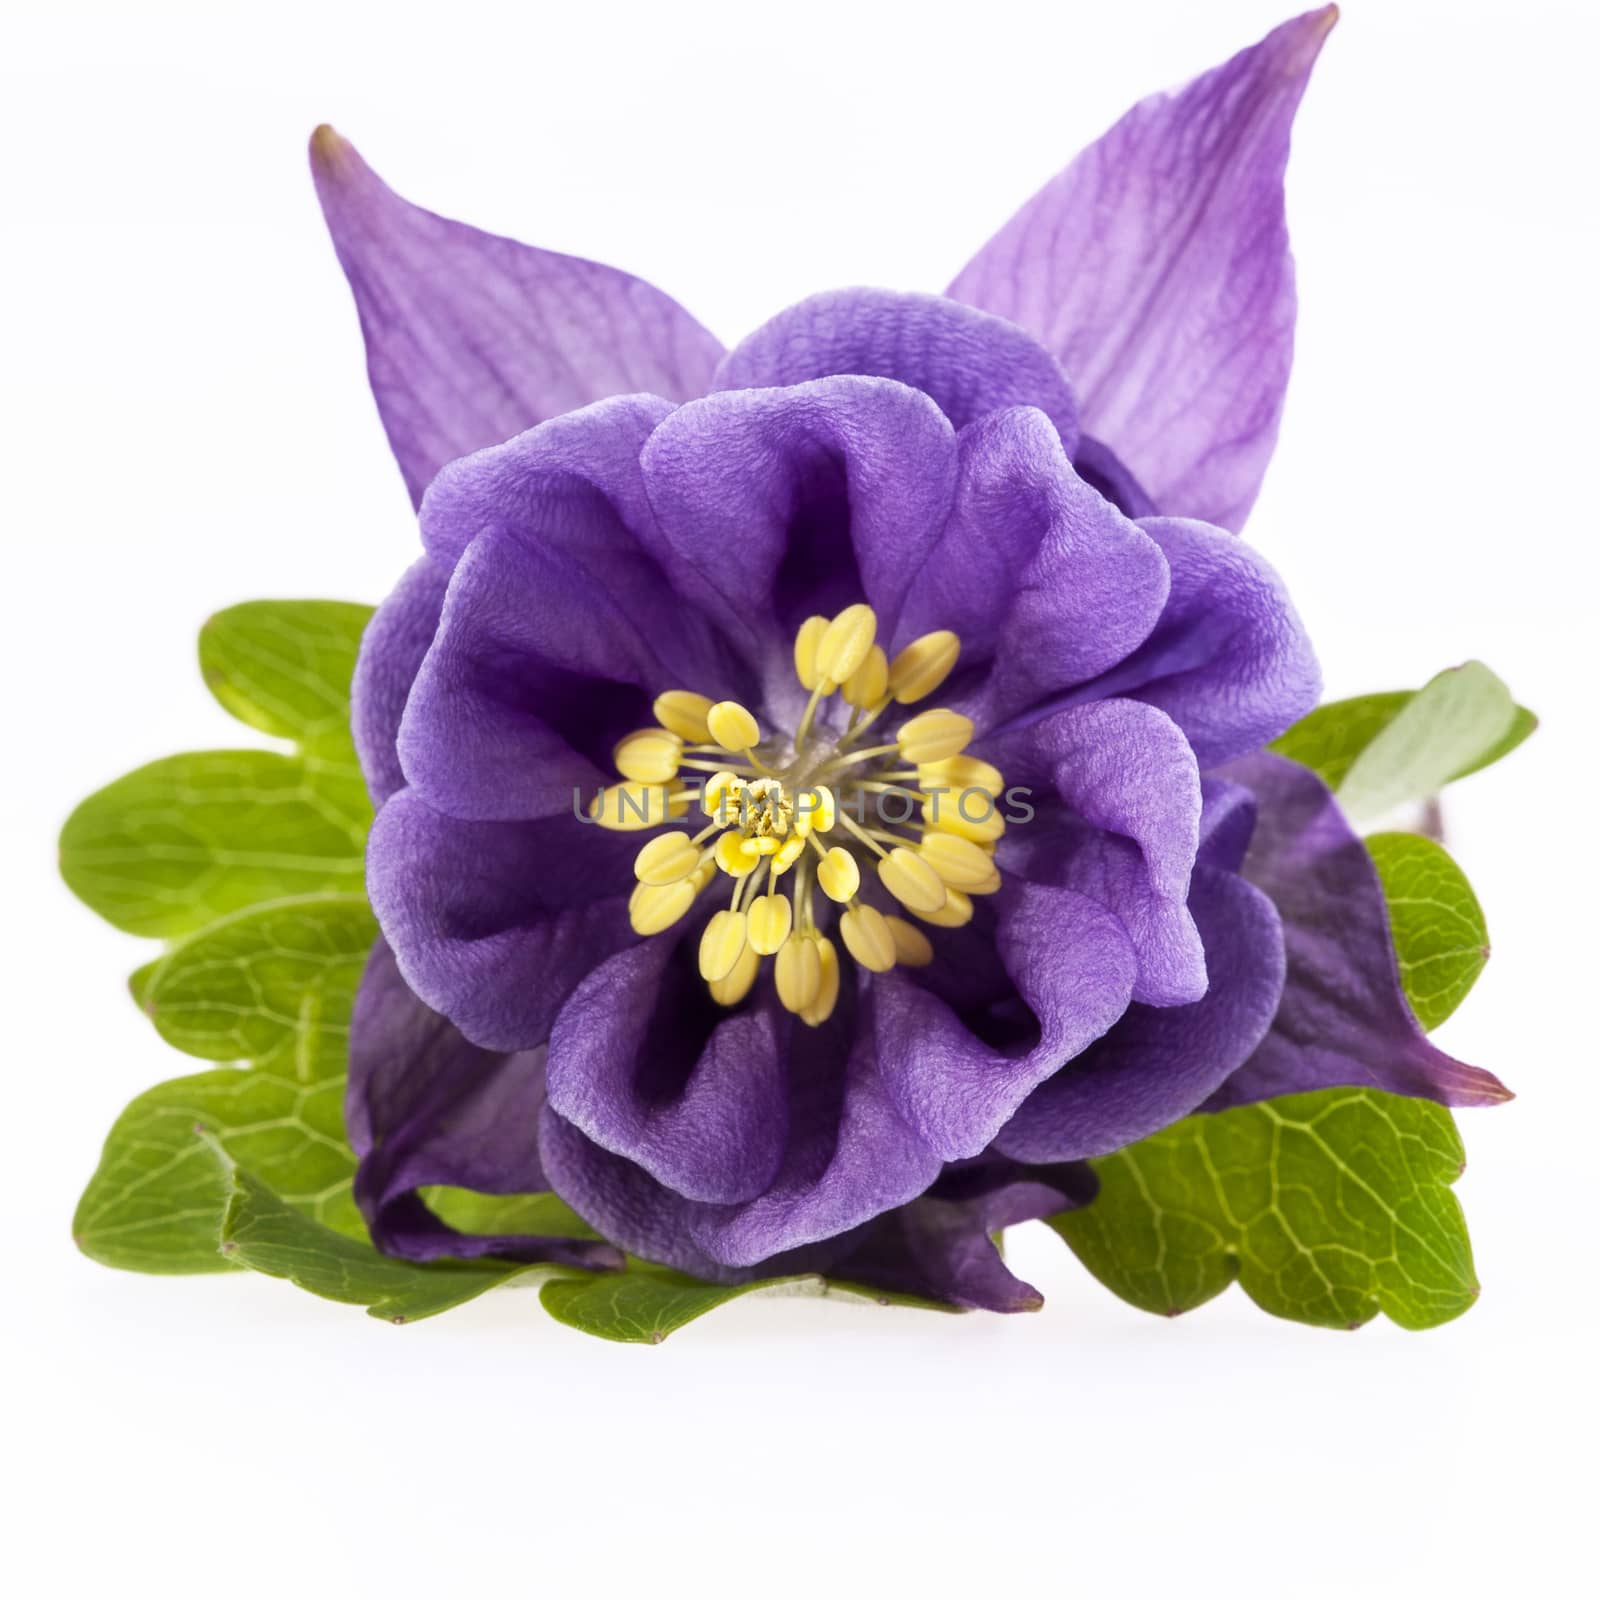 single violet  flower of Aquilegia vulgaris isolated on white background by mychadre77